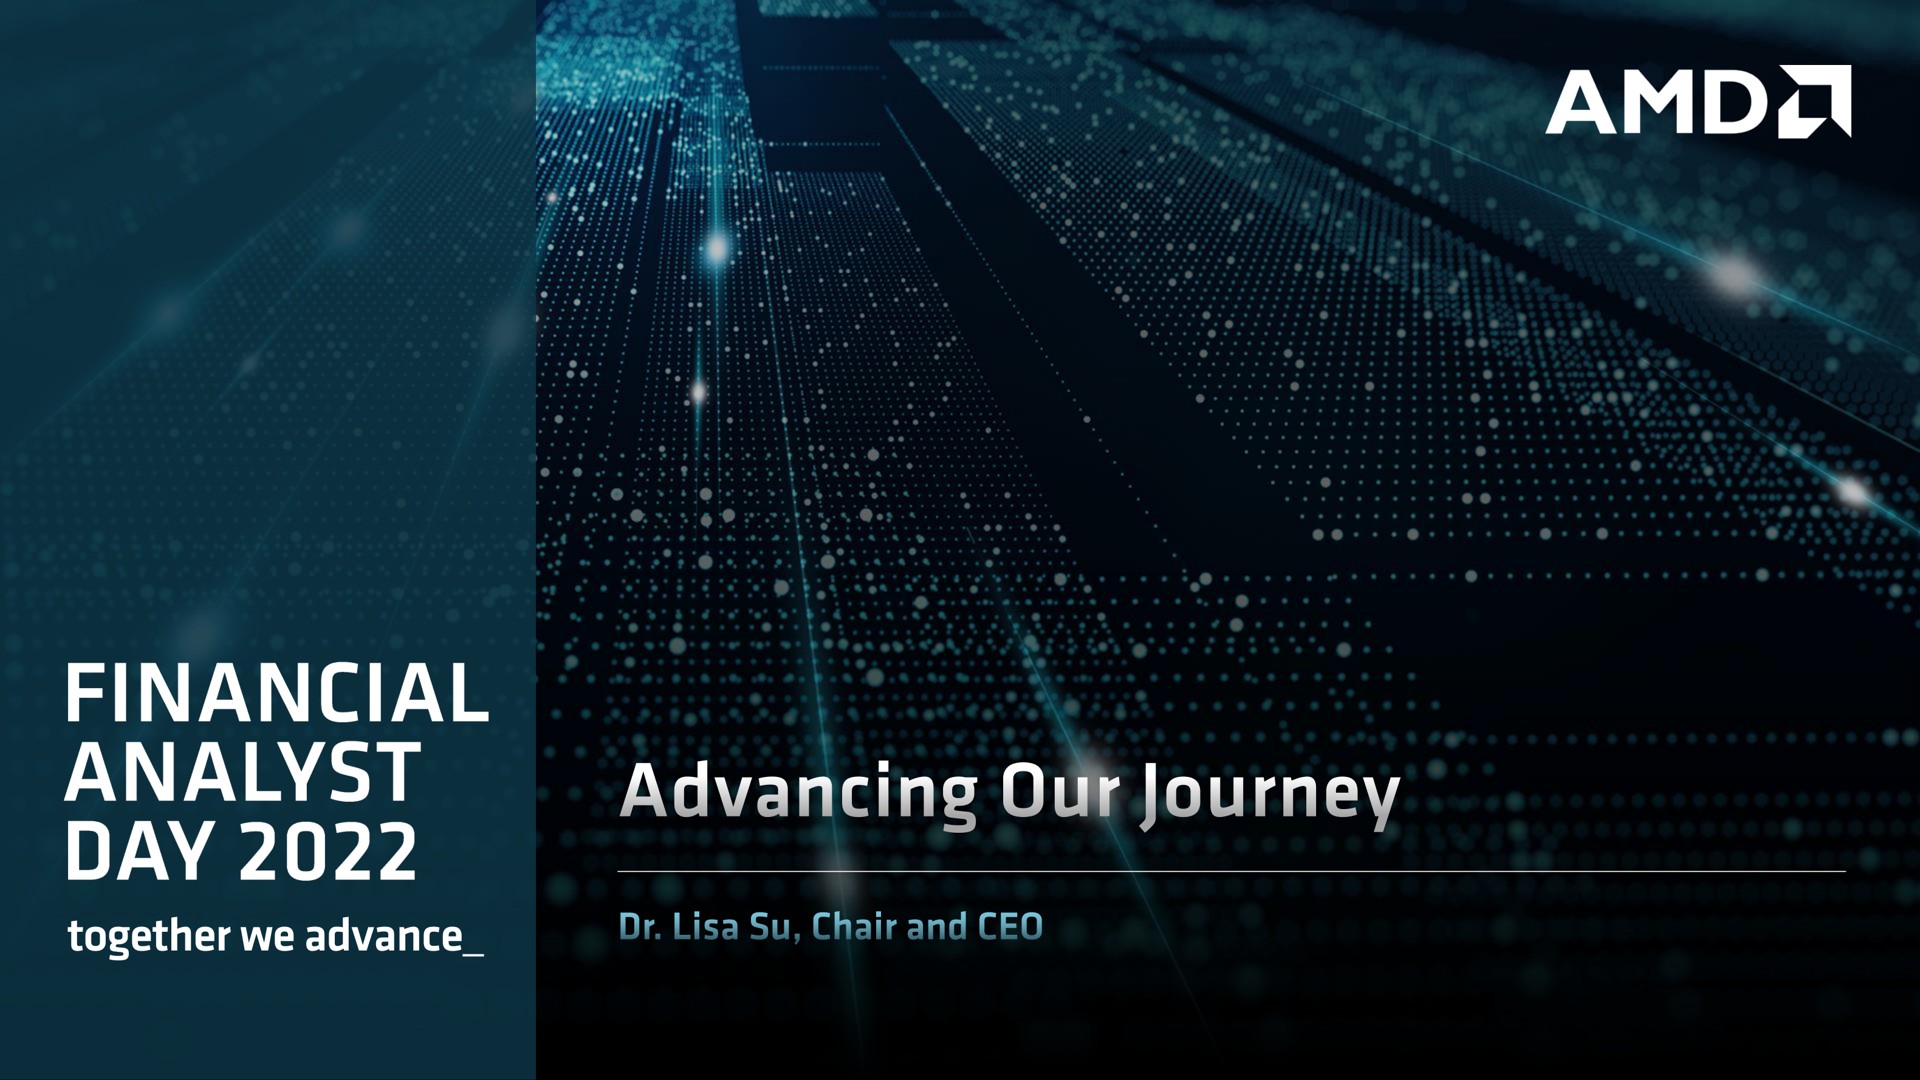 ice analyst day advancing our journey | AMD